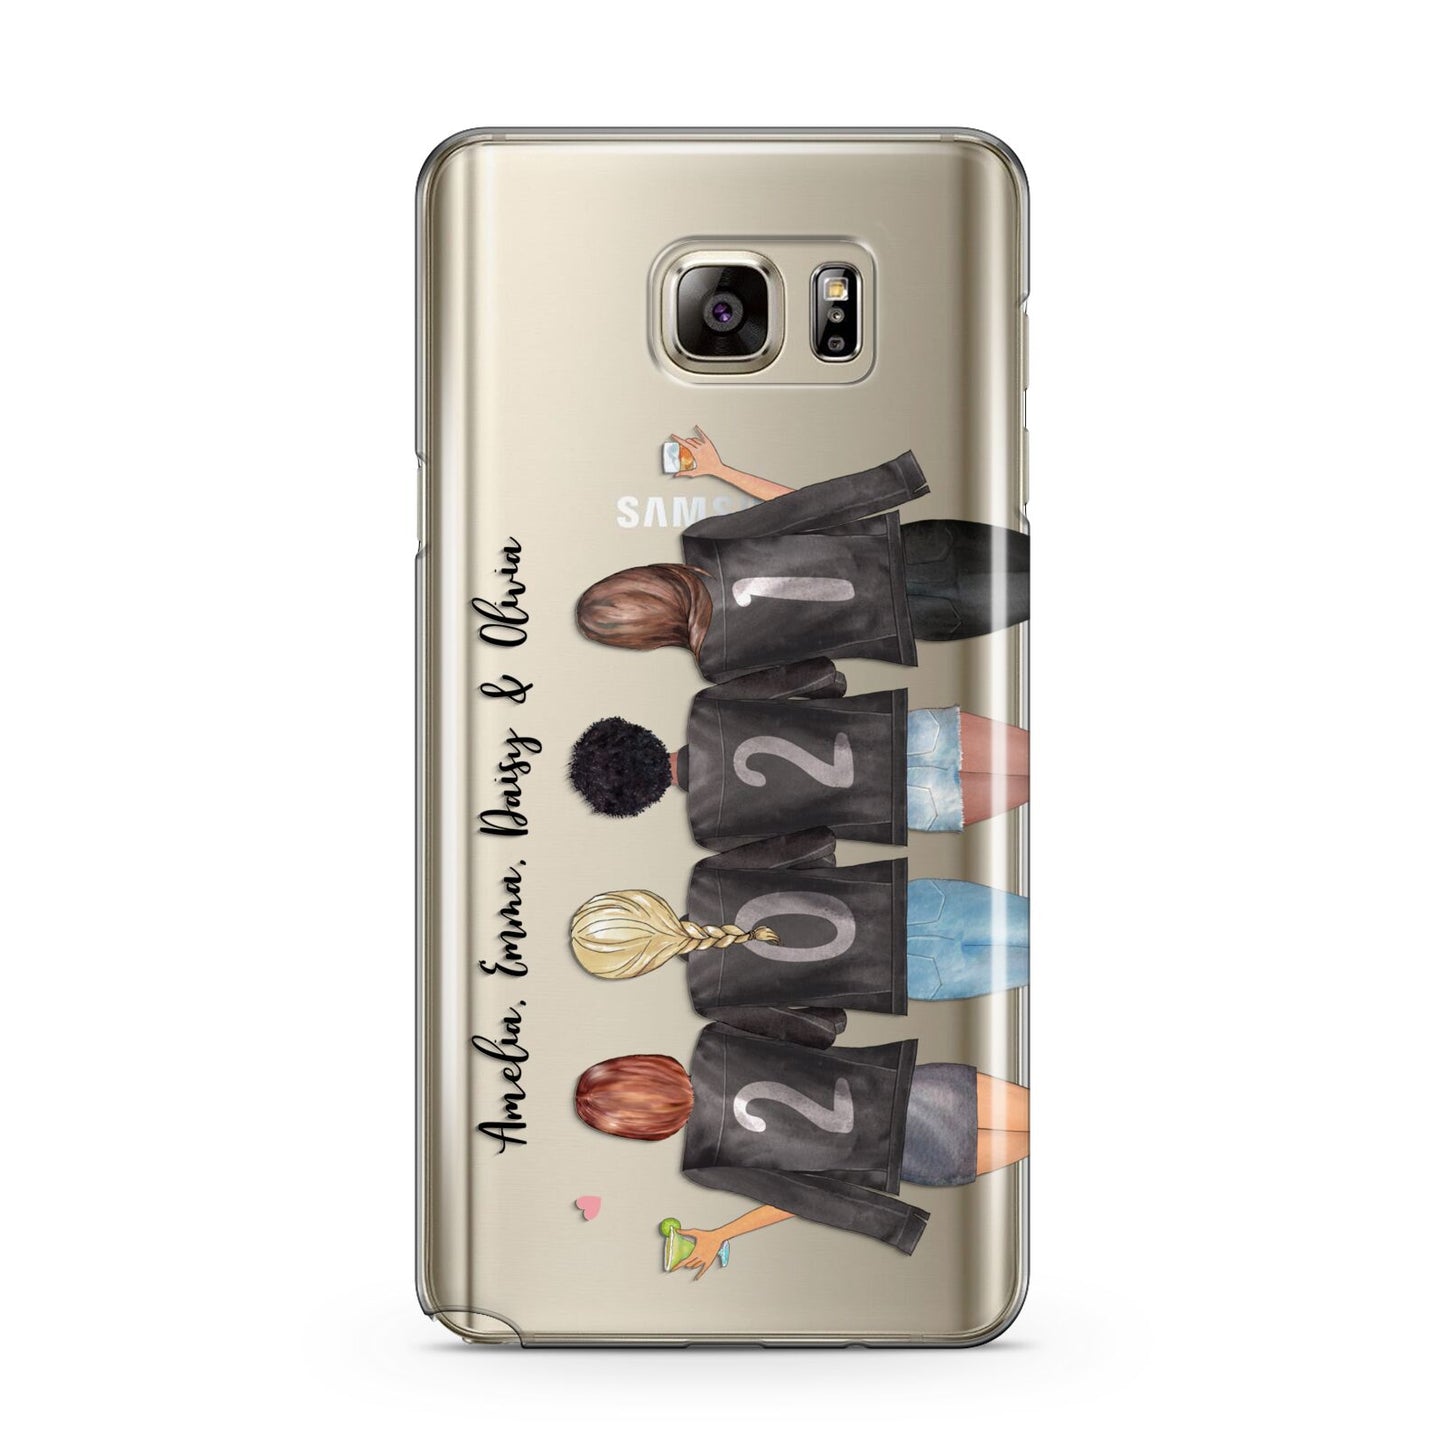 4 Best Friends with Names Samsung Galaxy Note 5 Case